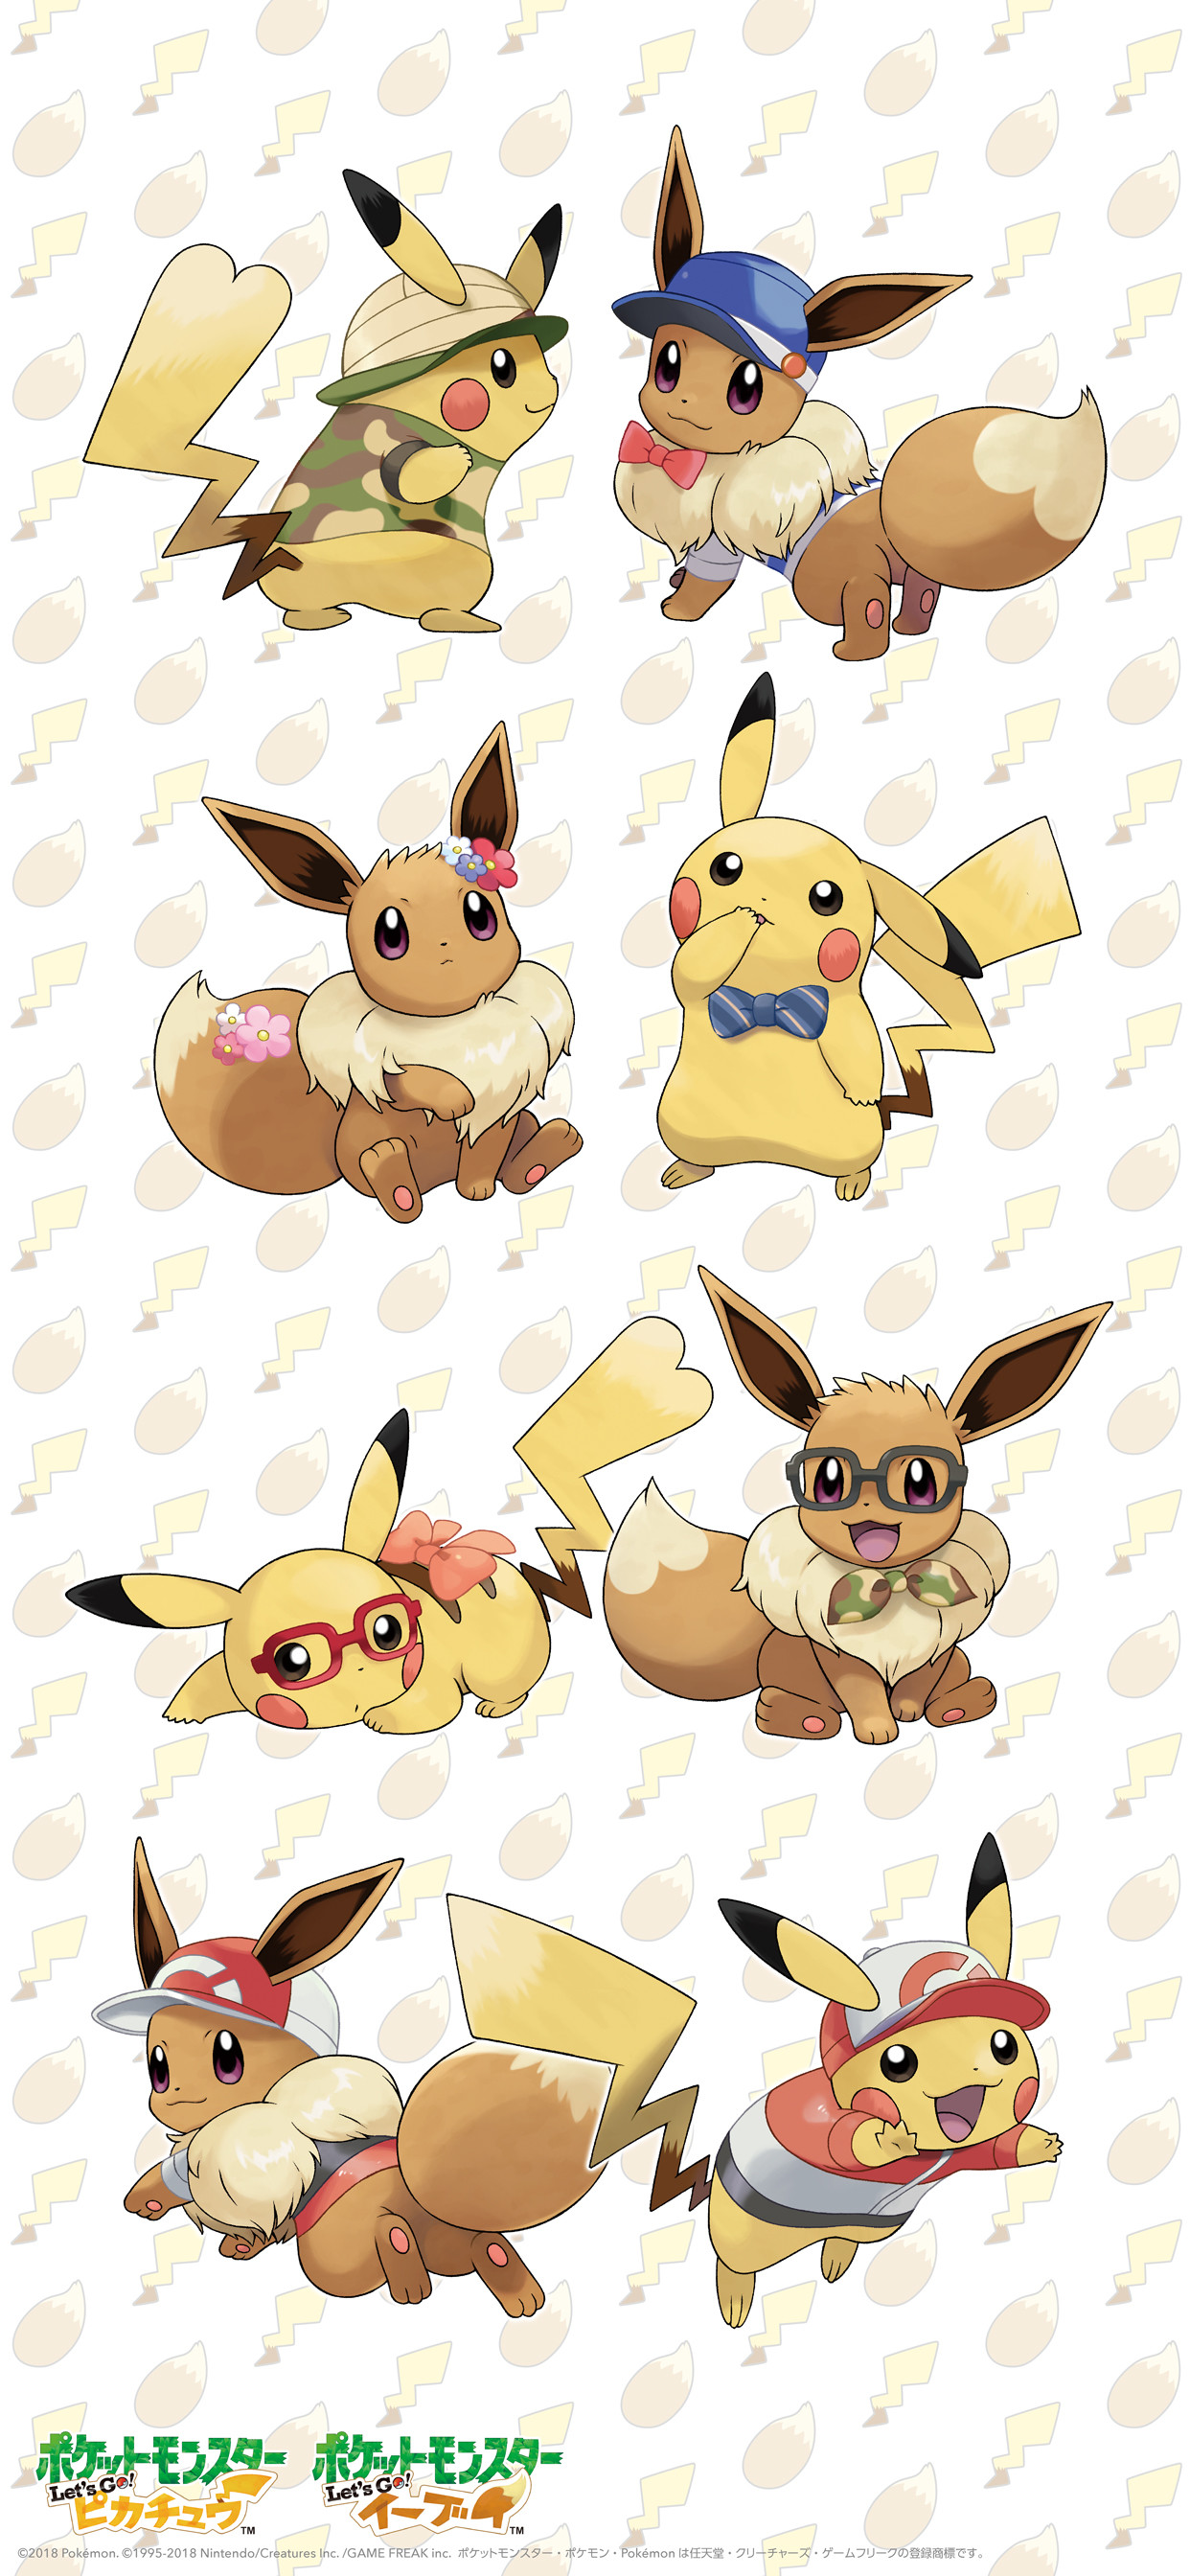 1242x2688 Download This Pokemon Let's GO Pikachu/Eevee Wallpaper For Your PC And  Smartphone